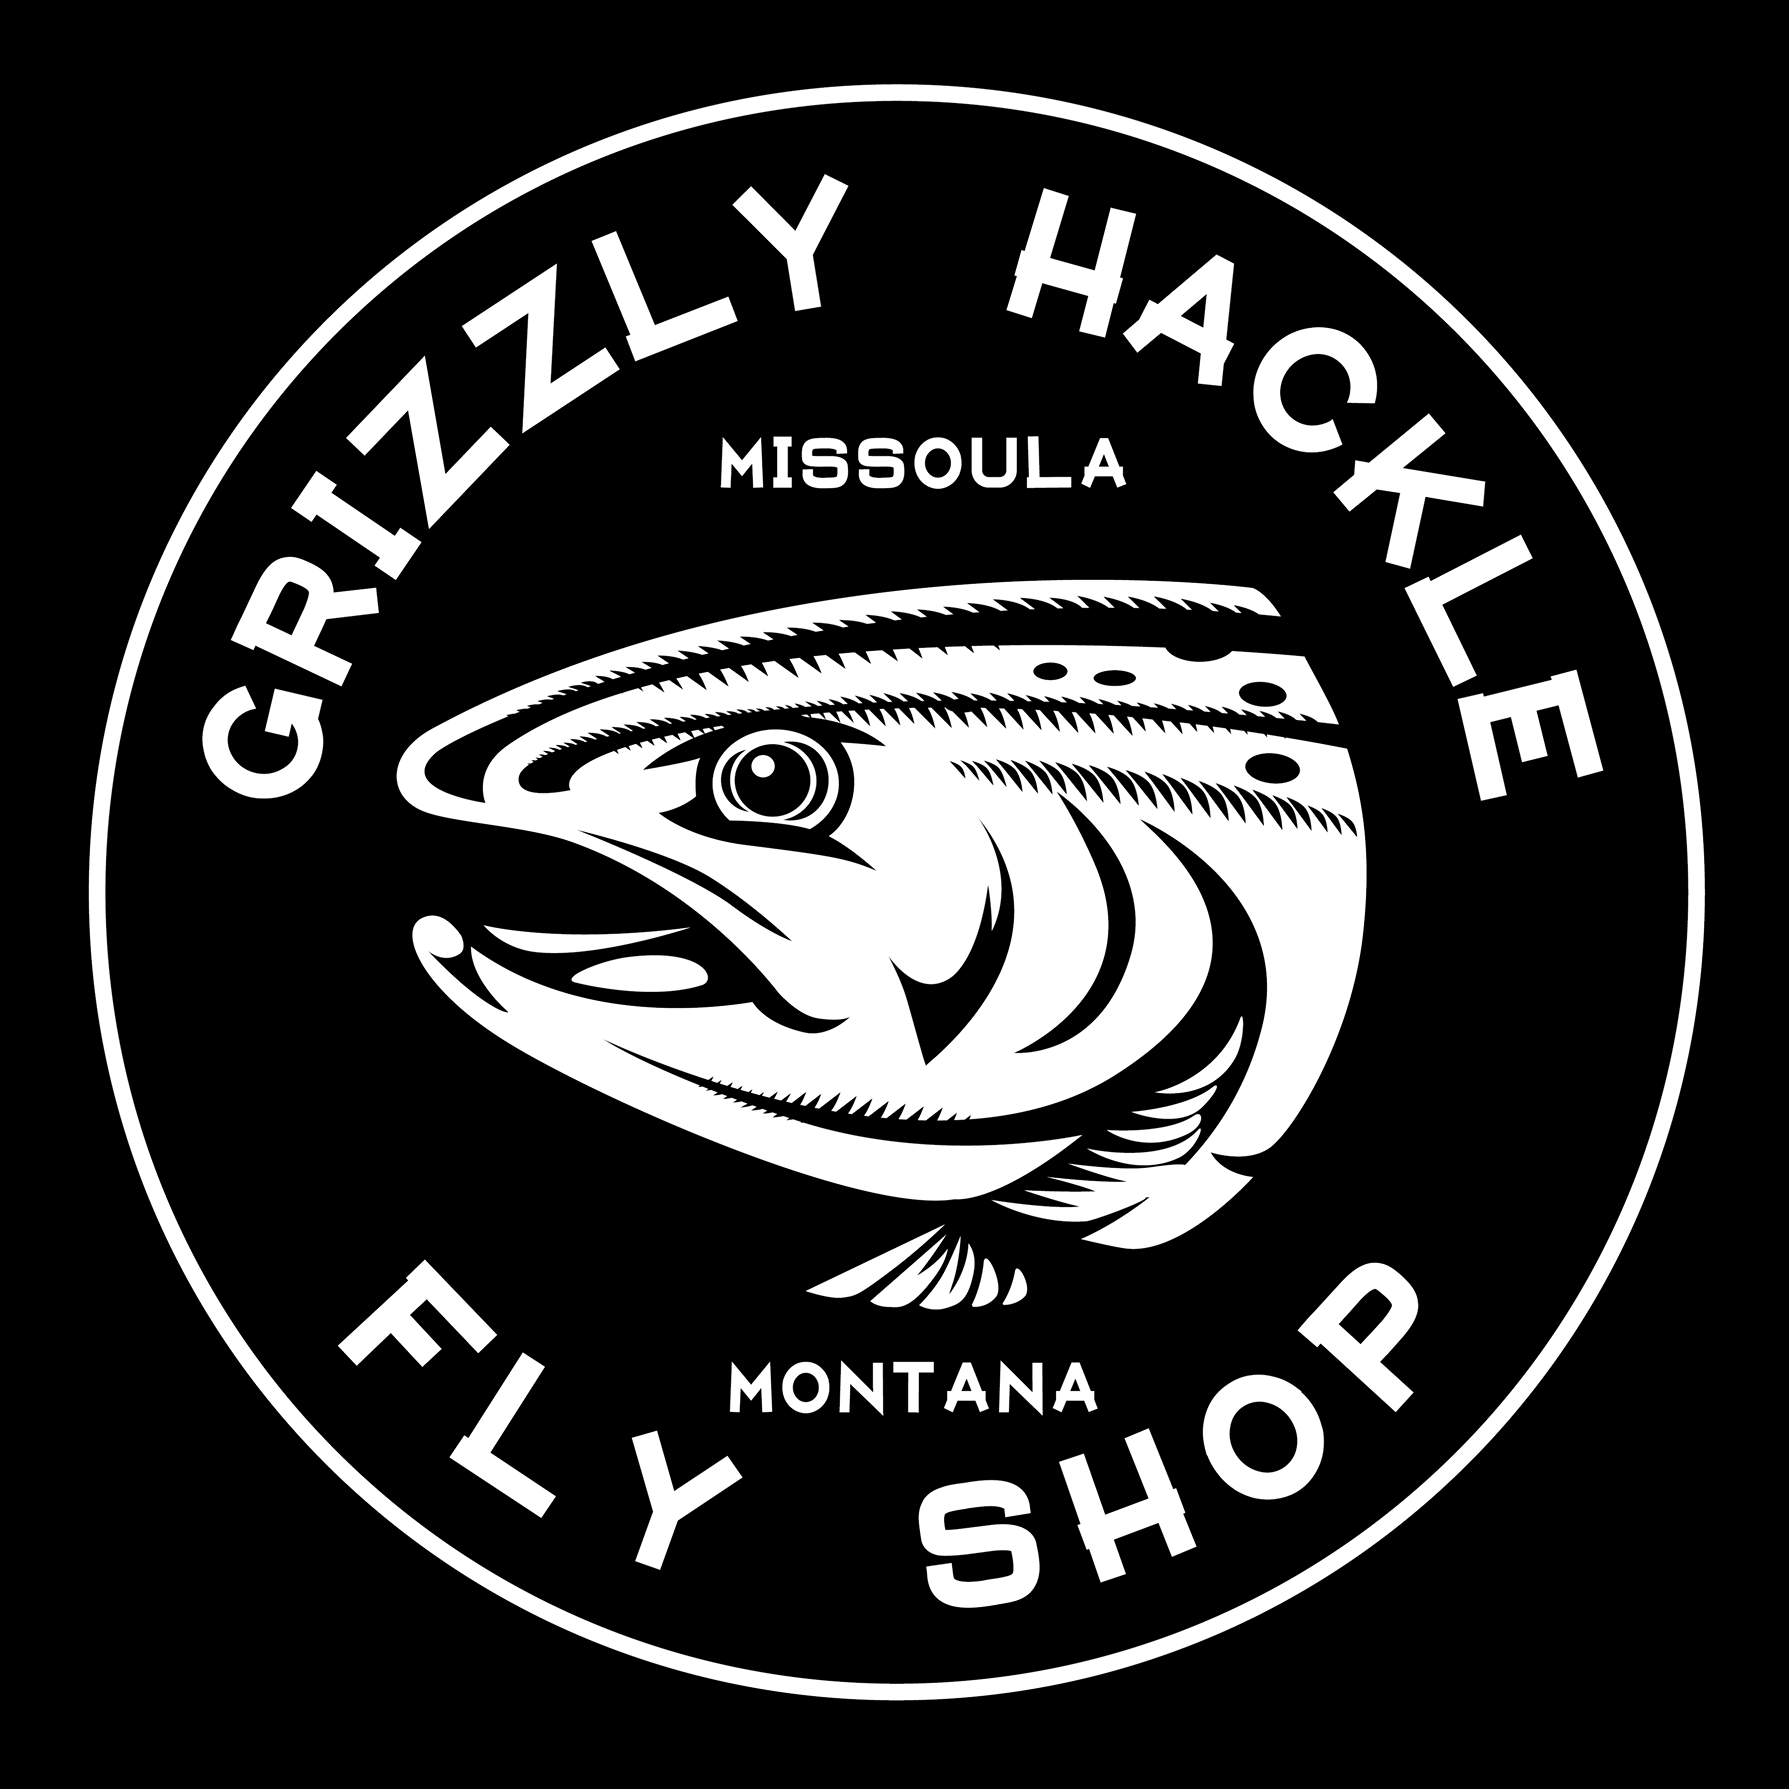 Business logo of Grizzly Hackle Fly Shop